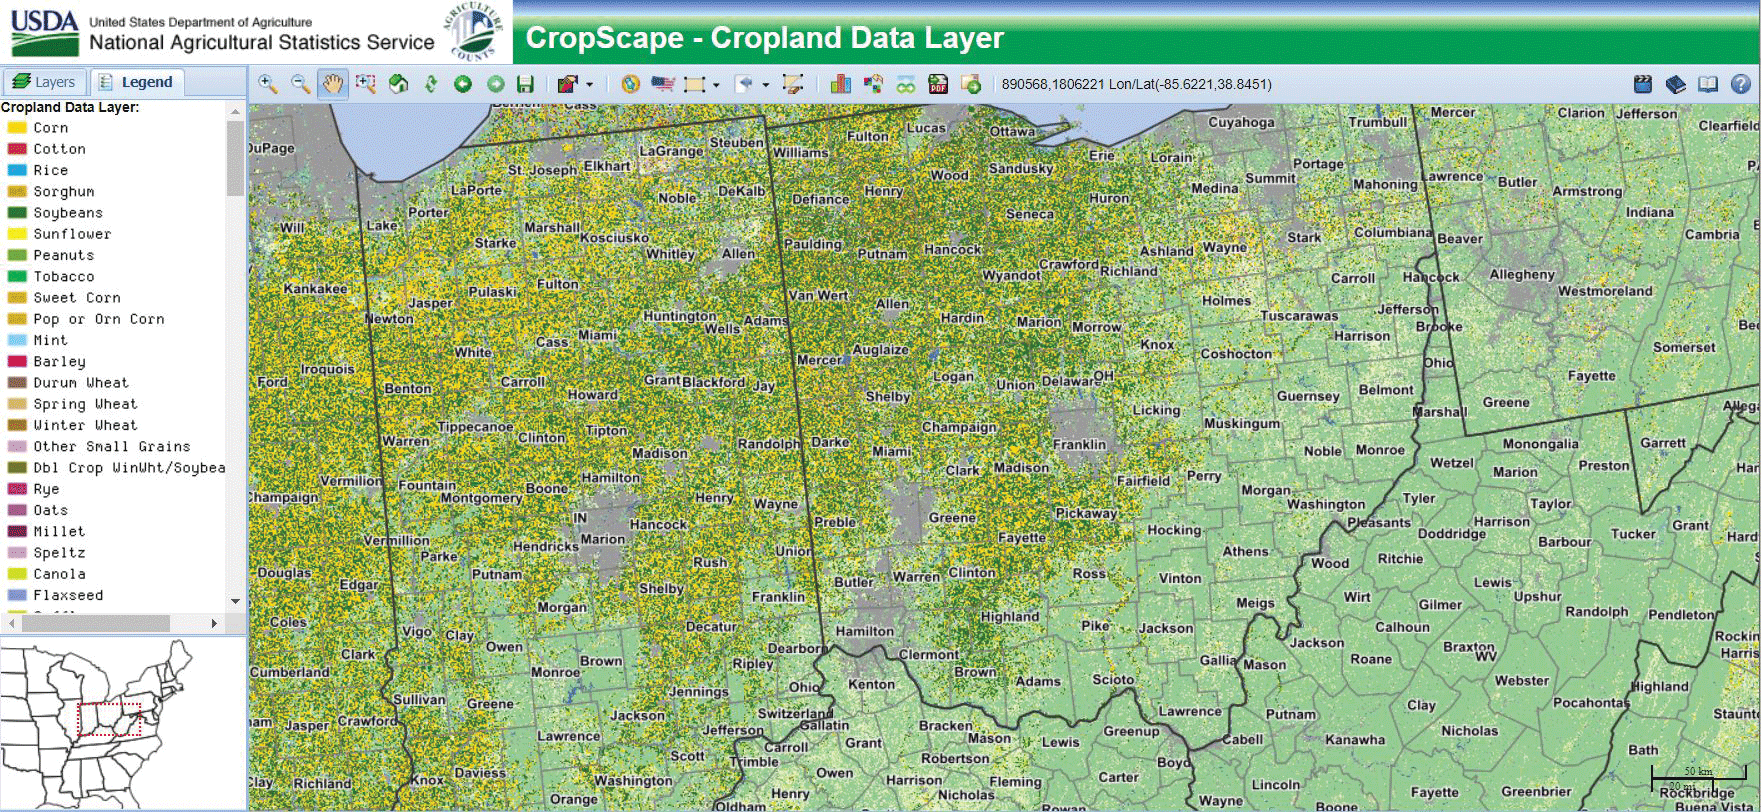 Screen capture showing forest, grassland, corn, and soybeans are the primary cropland
                     types in Indiana.